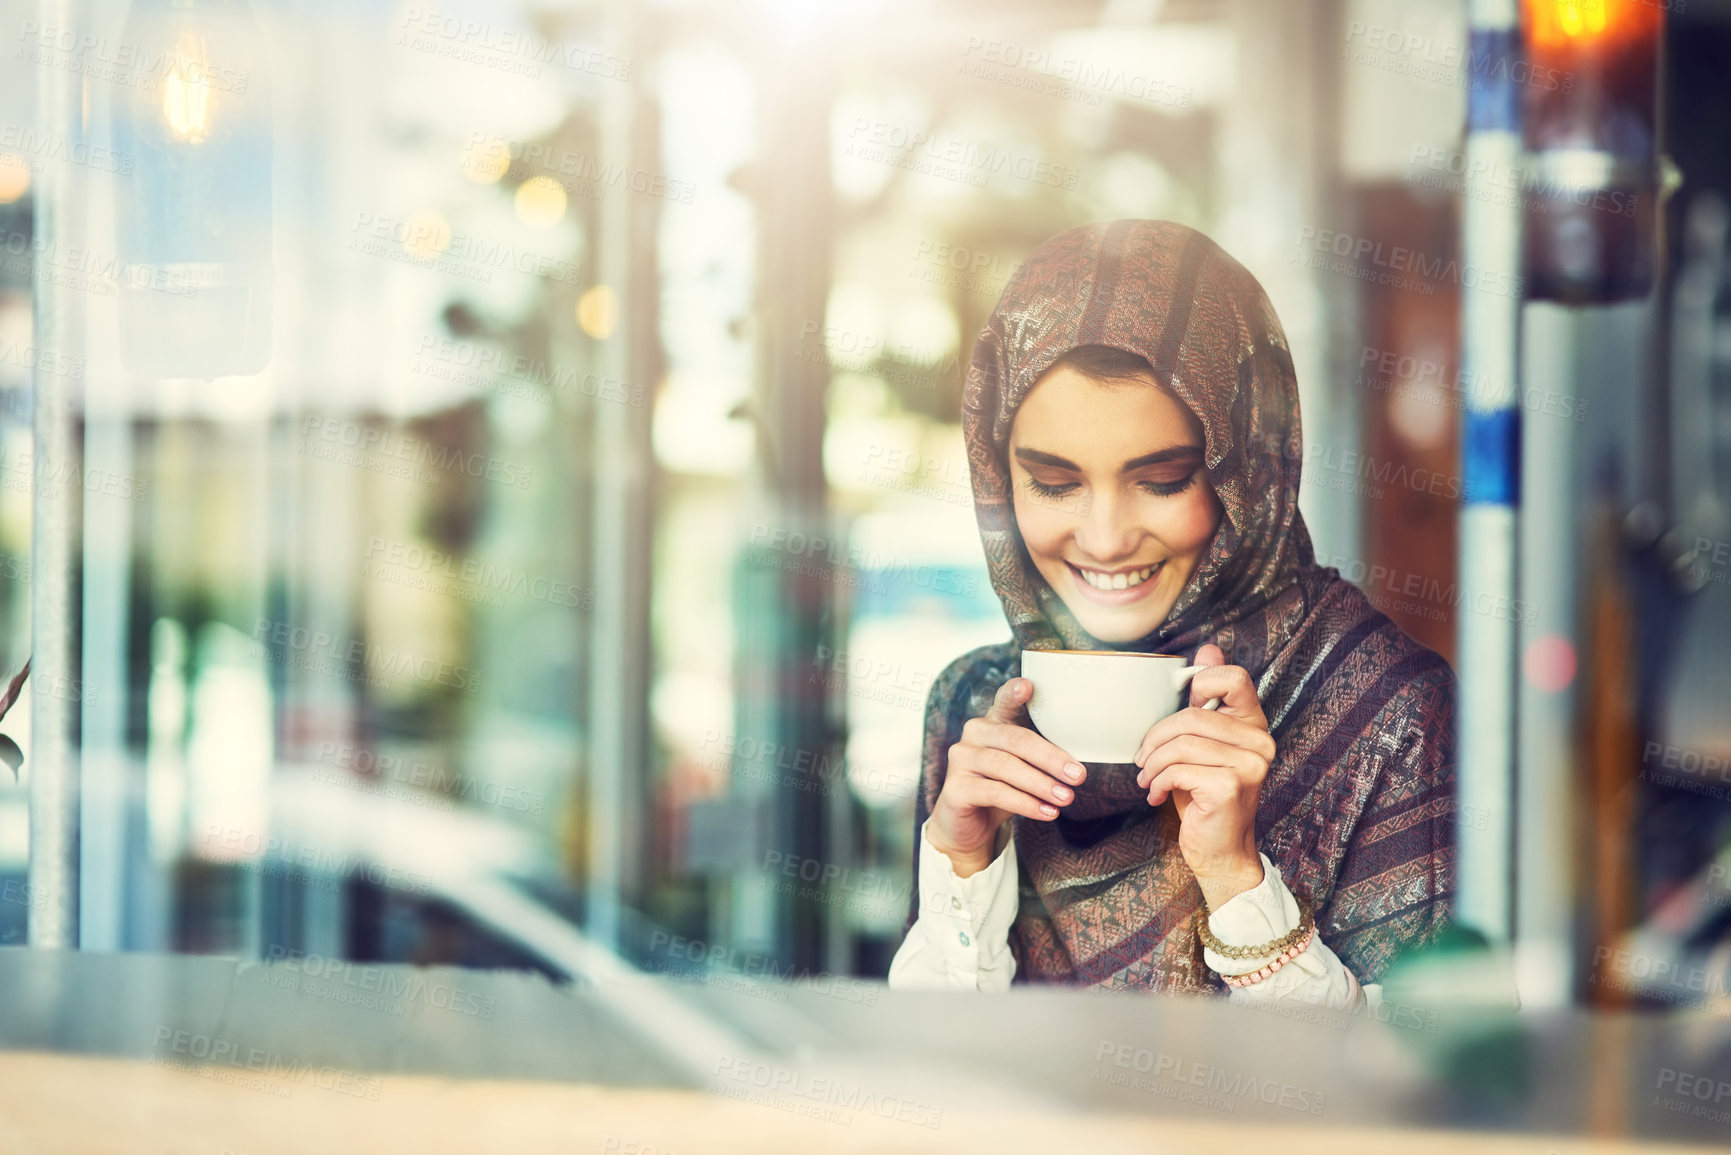 Buy stock photo Shot of a young woman having a cup of coffee in a cafe